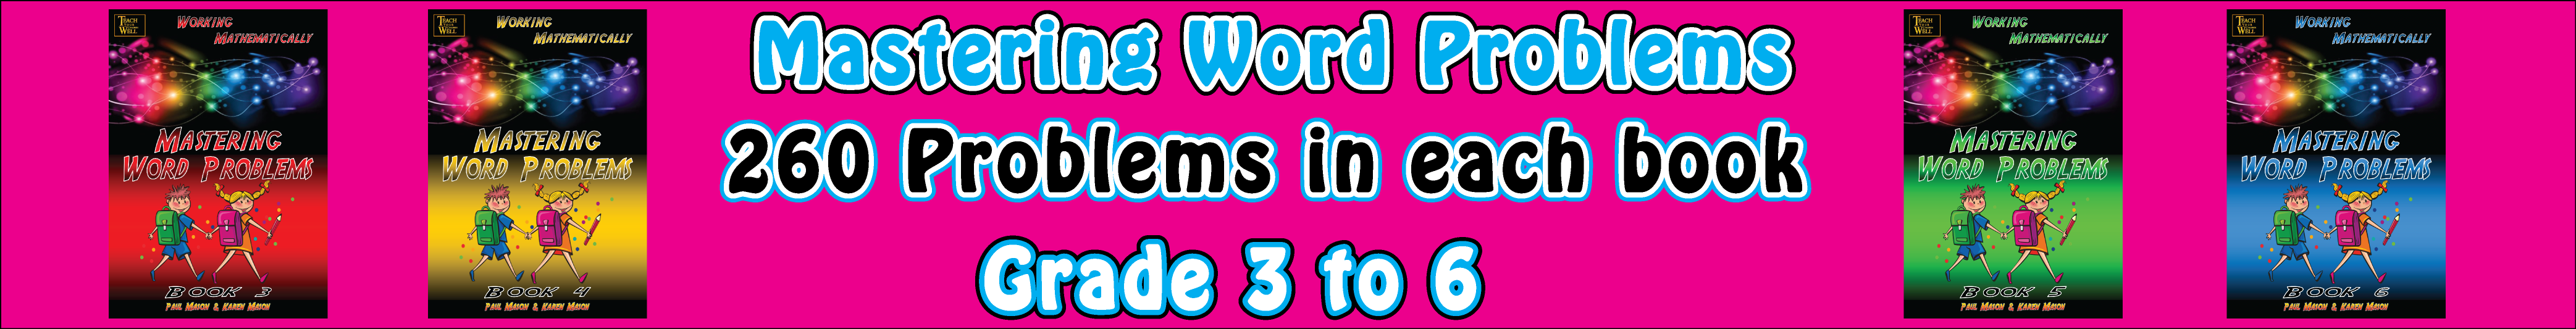 Mastering Word Problems Graphic